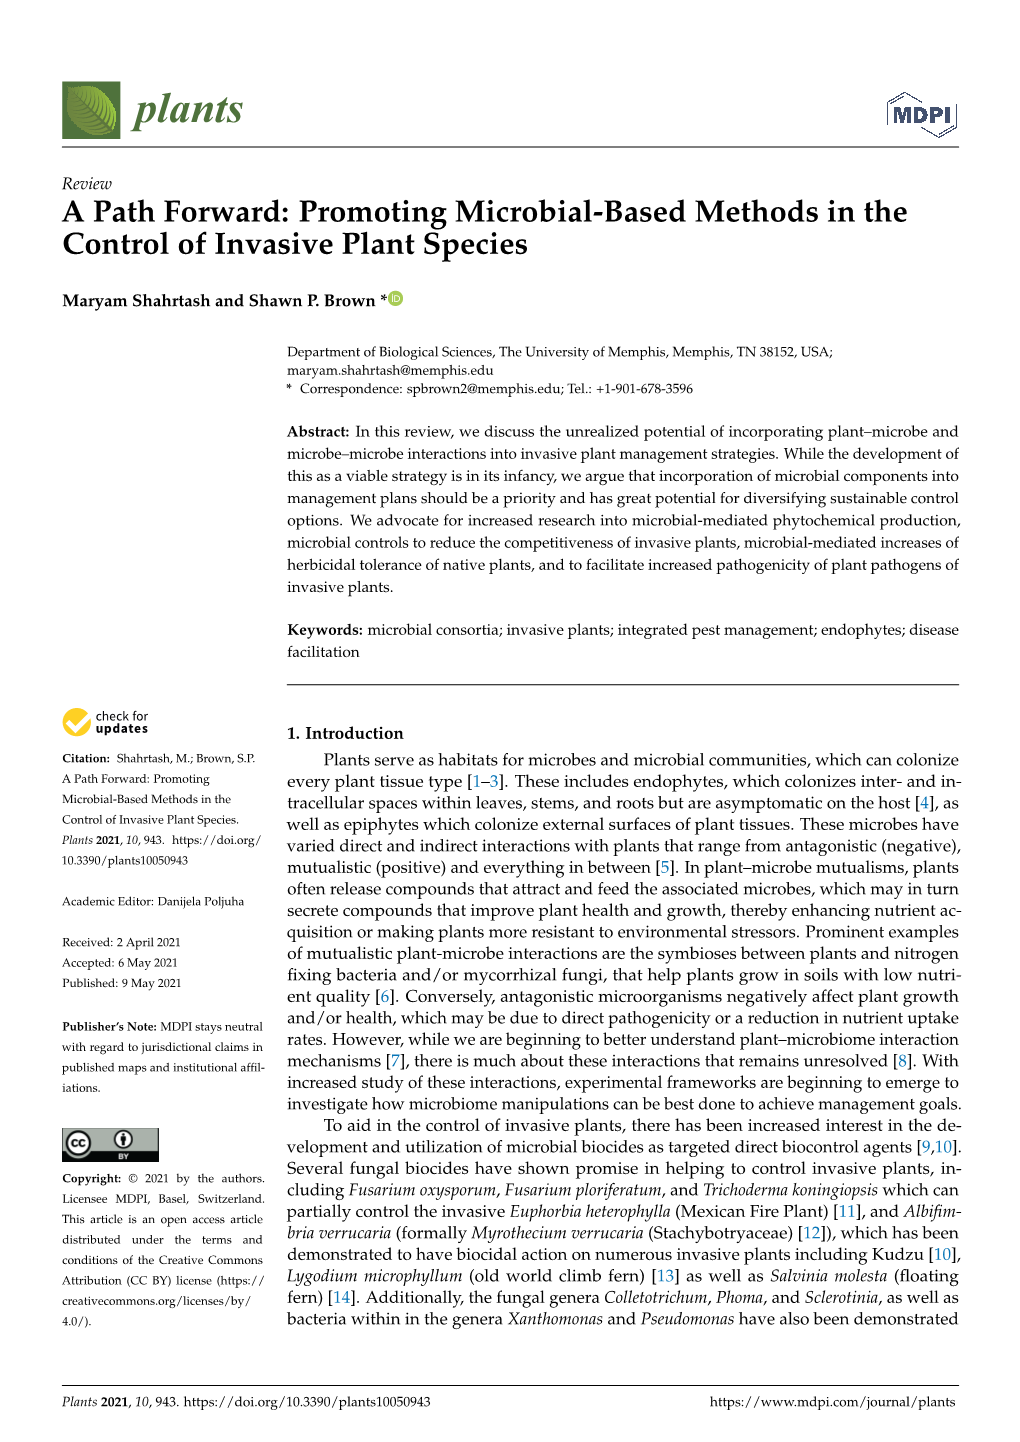 Promoting Microbial-Based Methods in the Control of Invasive Plant Species